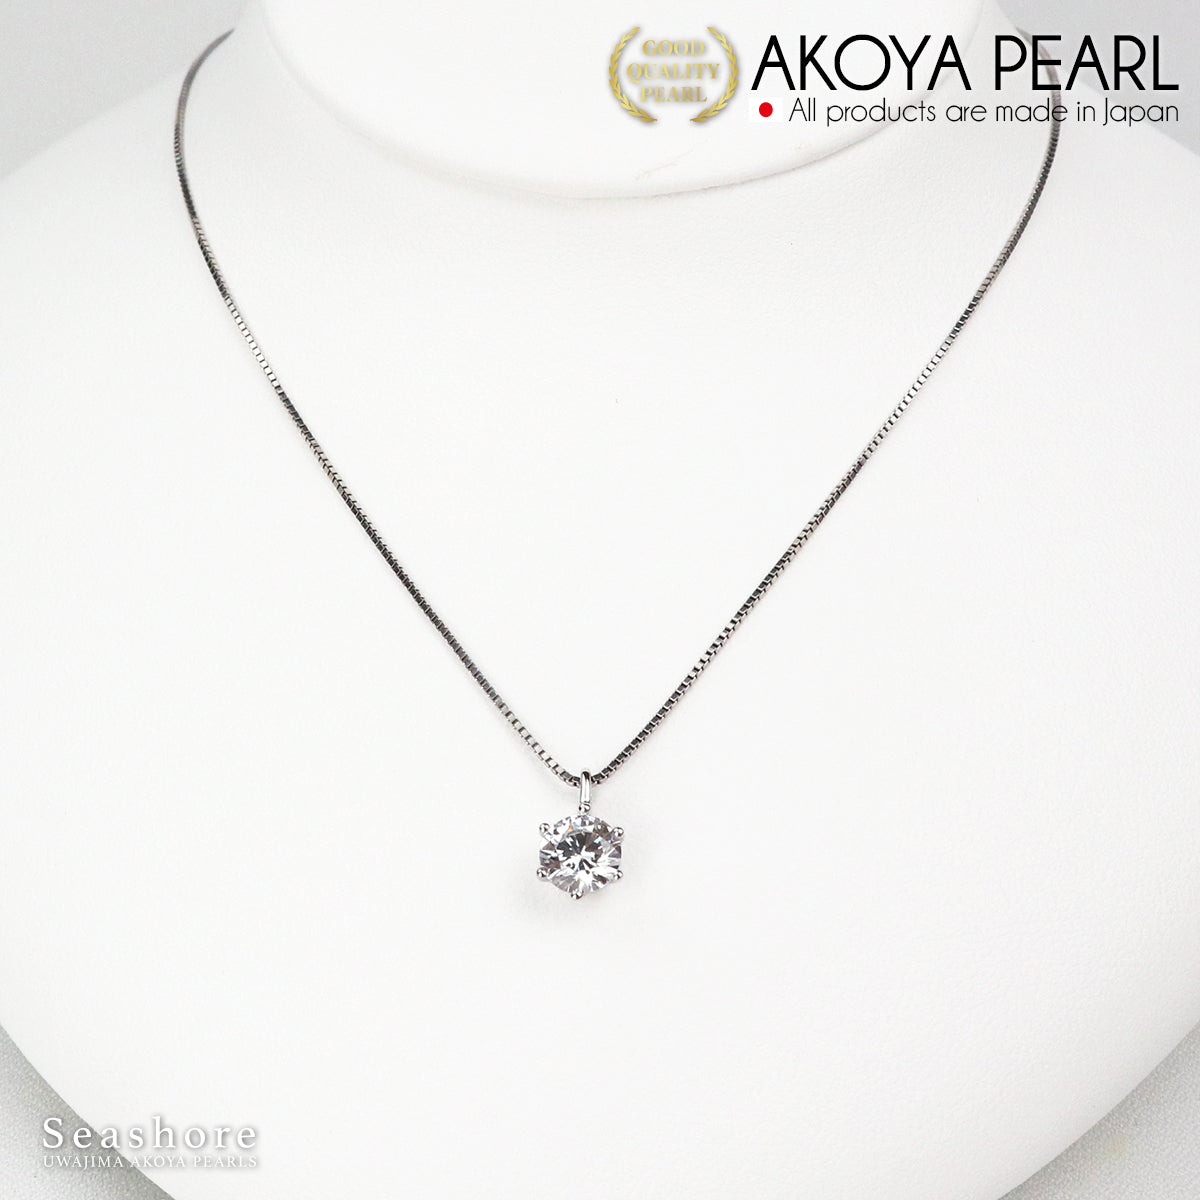 Flower beads &amp; Zirconia 1.2 carat 2WAY pearl pendant [8.0-8.5mm] SV925 Venetian chain with gray storage case and 3 star appraisal (3822)